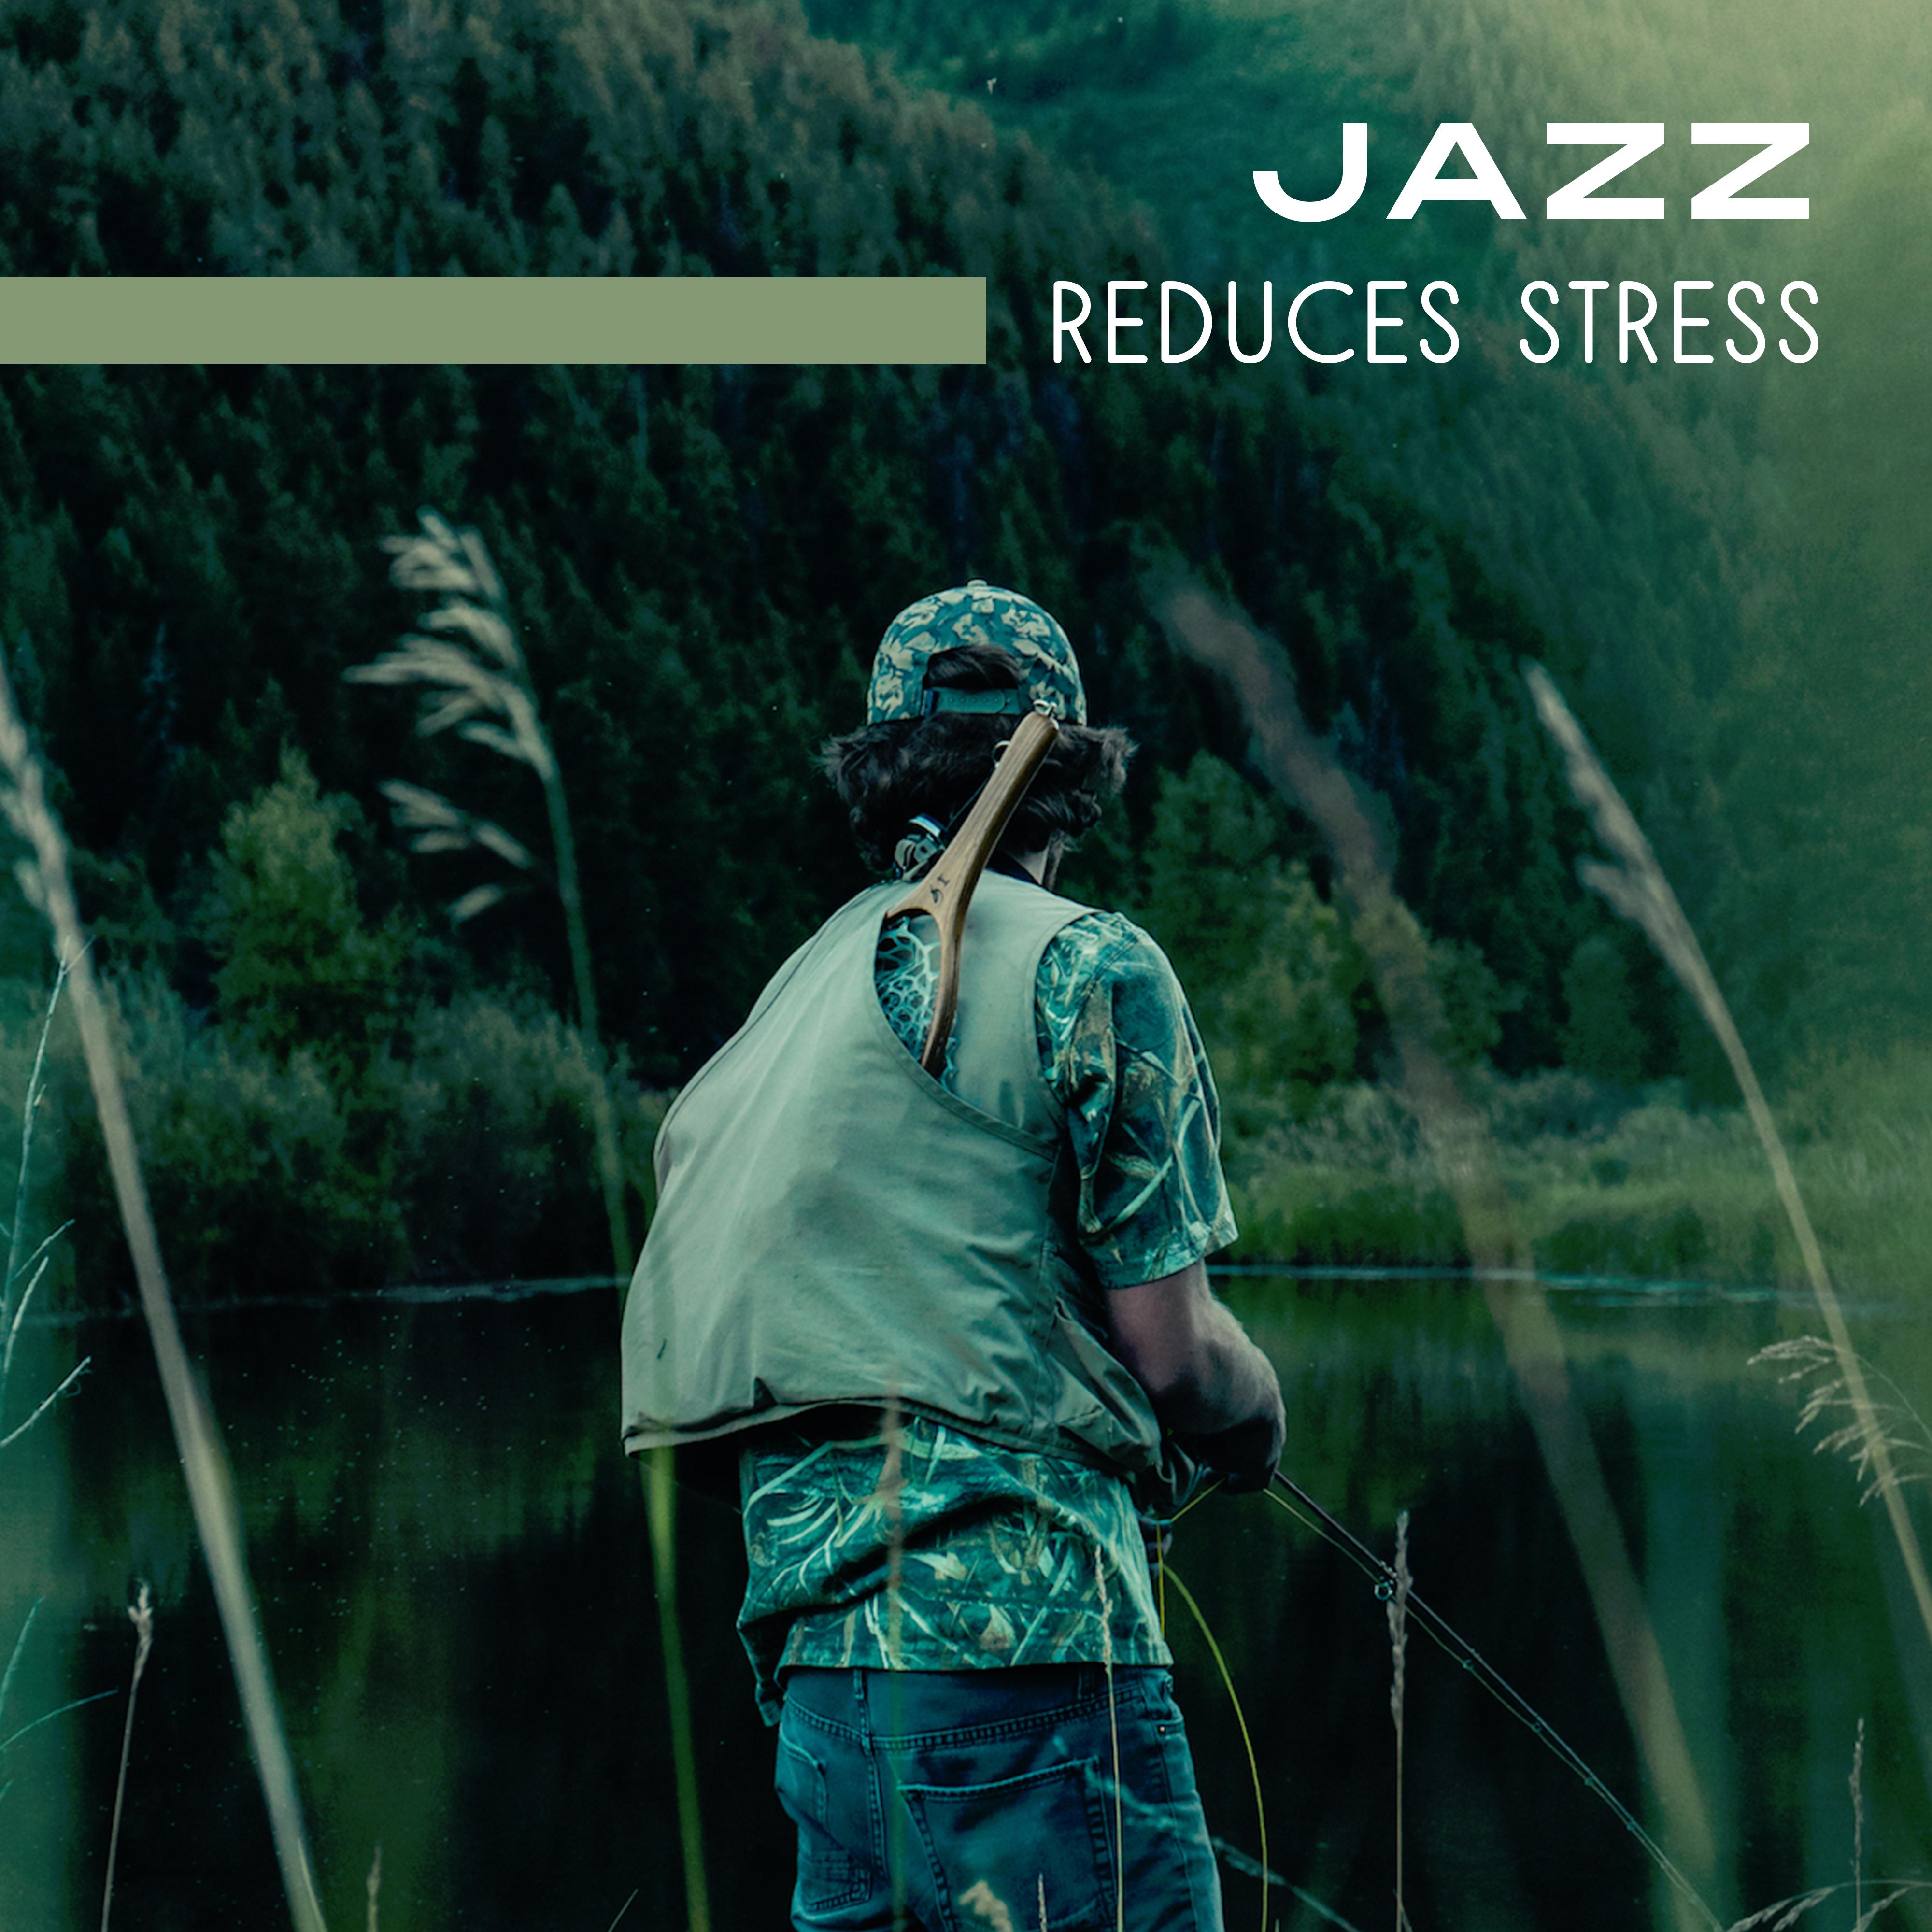 Jazz Reduces Stress  Instrumental Music for Relaxation, Chilled Jazz, Soothing Guitar, Piano Lounge, Pure Jazz, Rest, Anti Stress Sounds